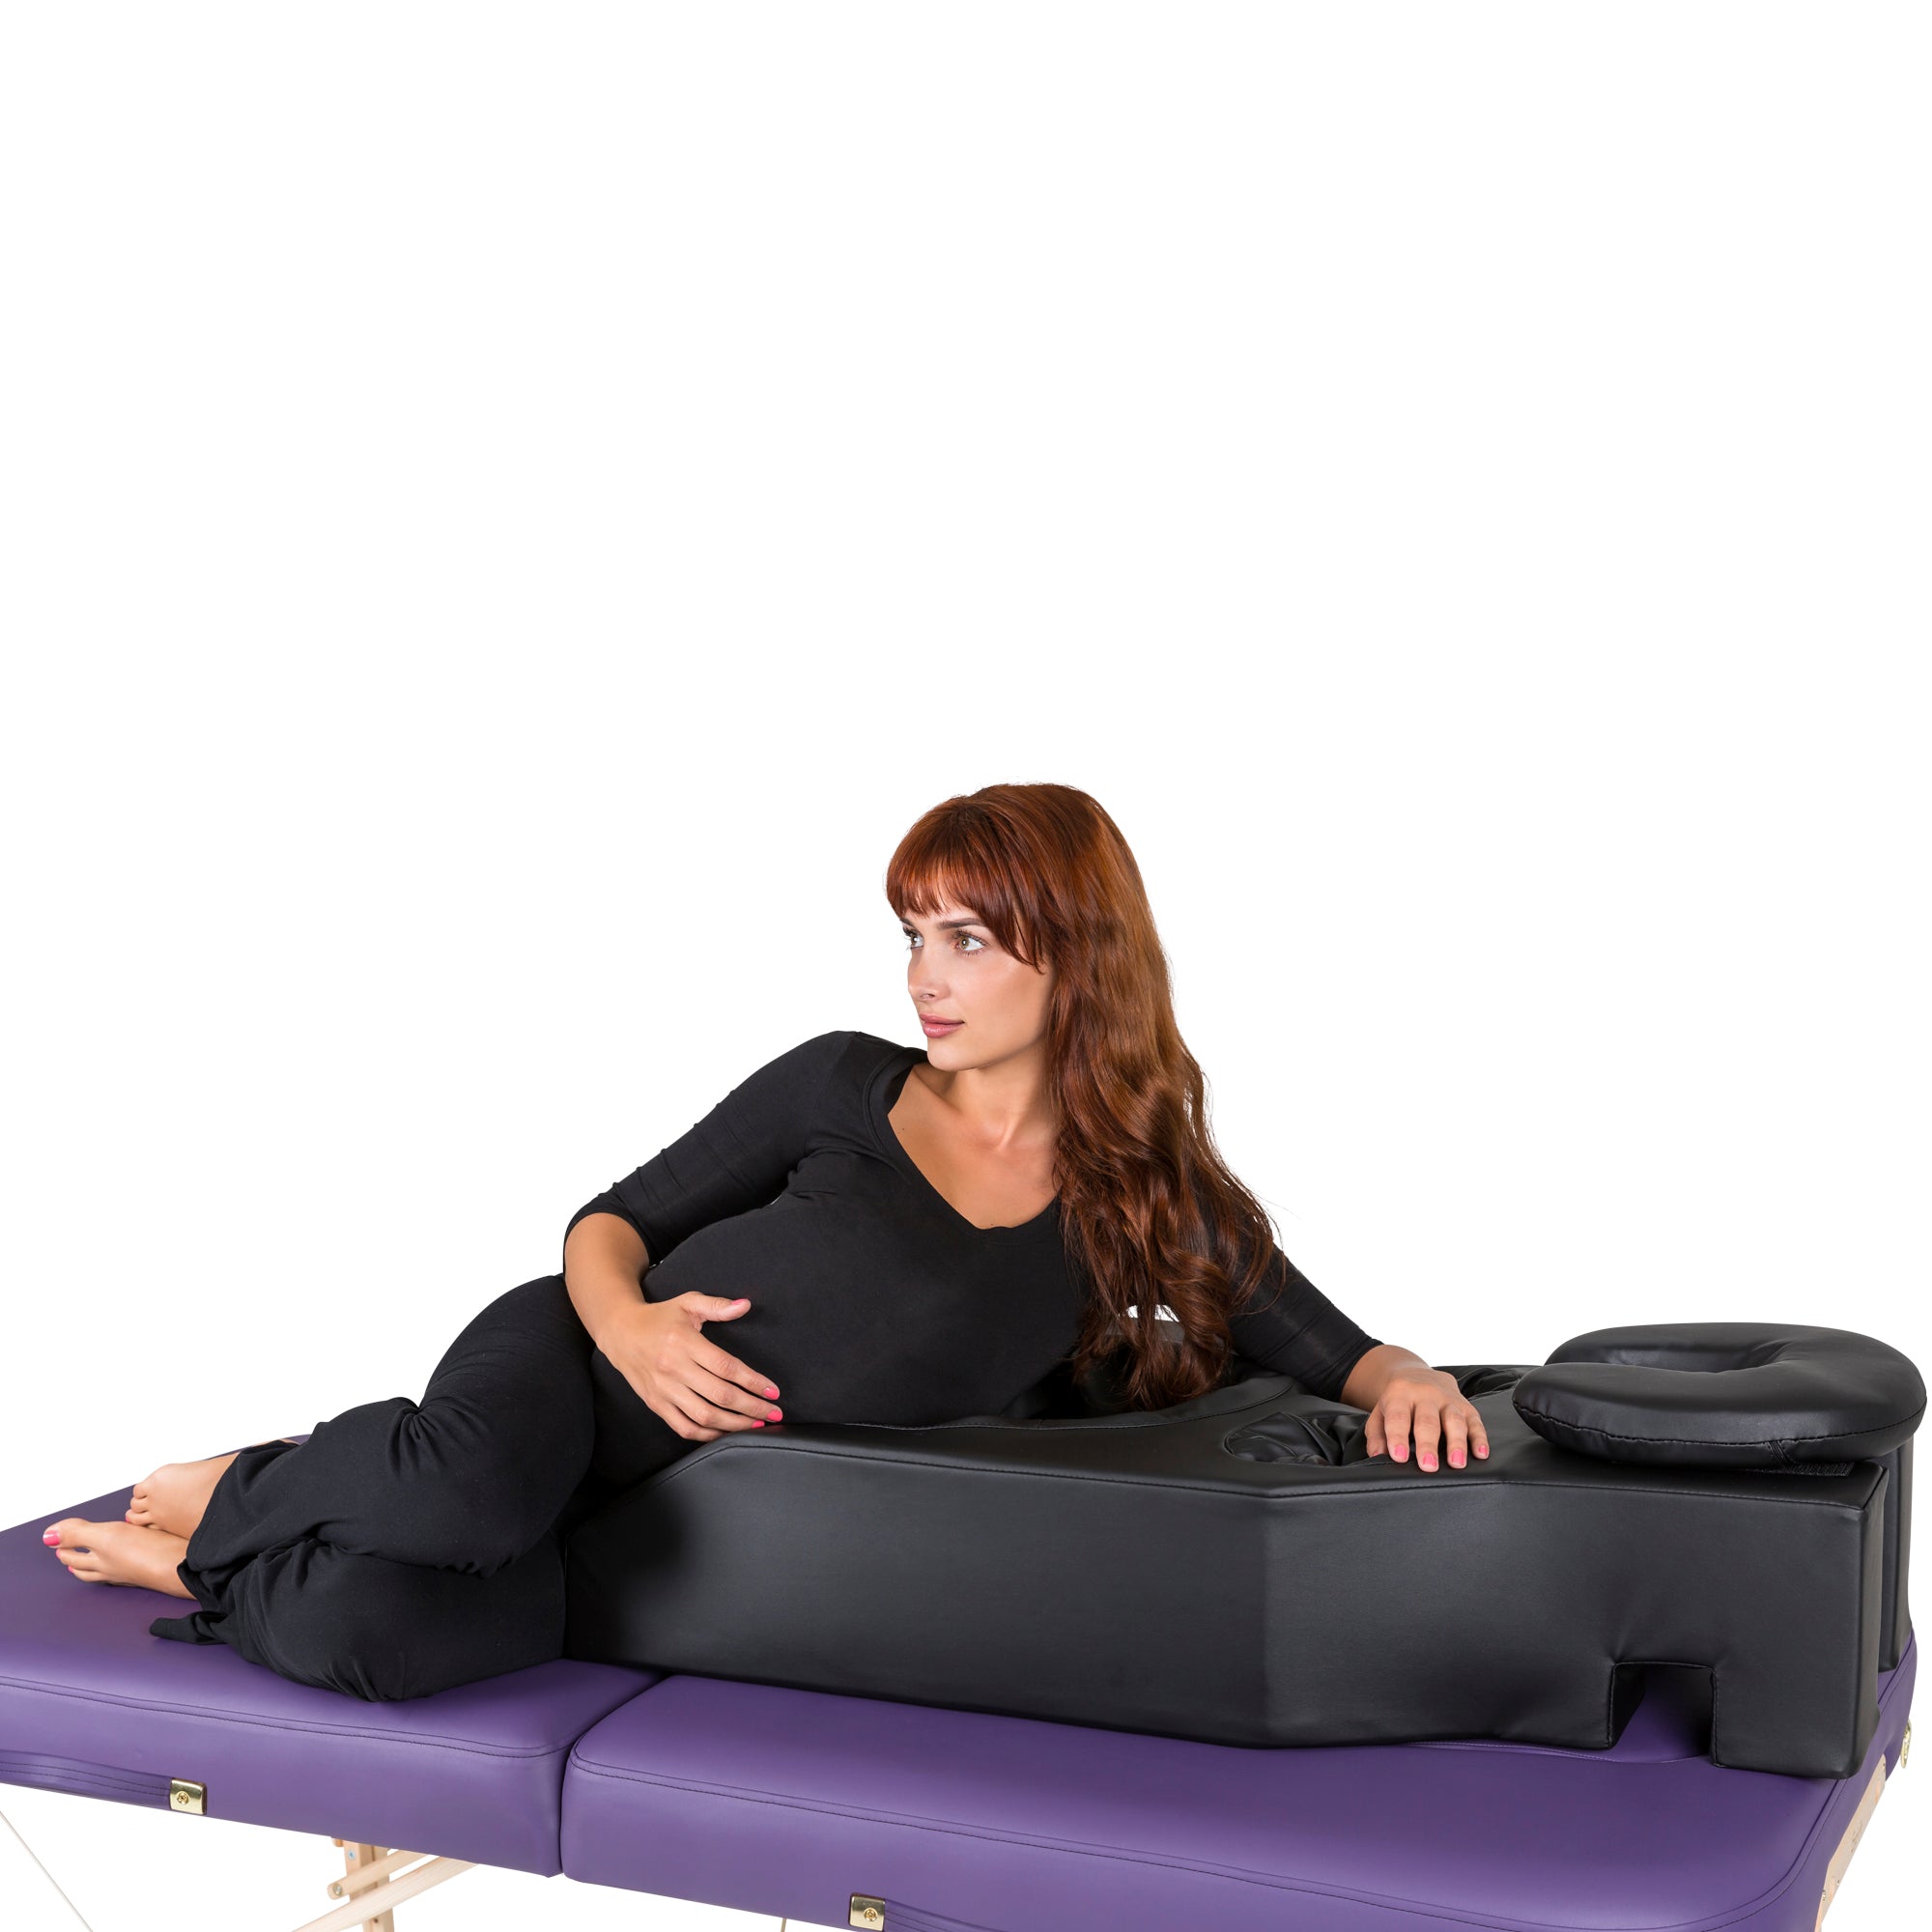 Tables: Pregnancy Cushions and Tables - ibodycare